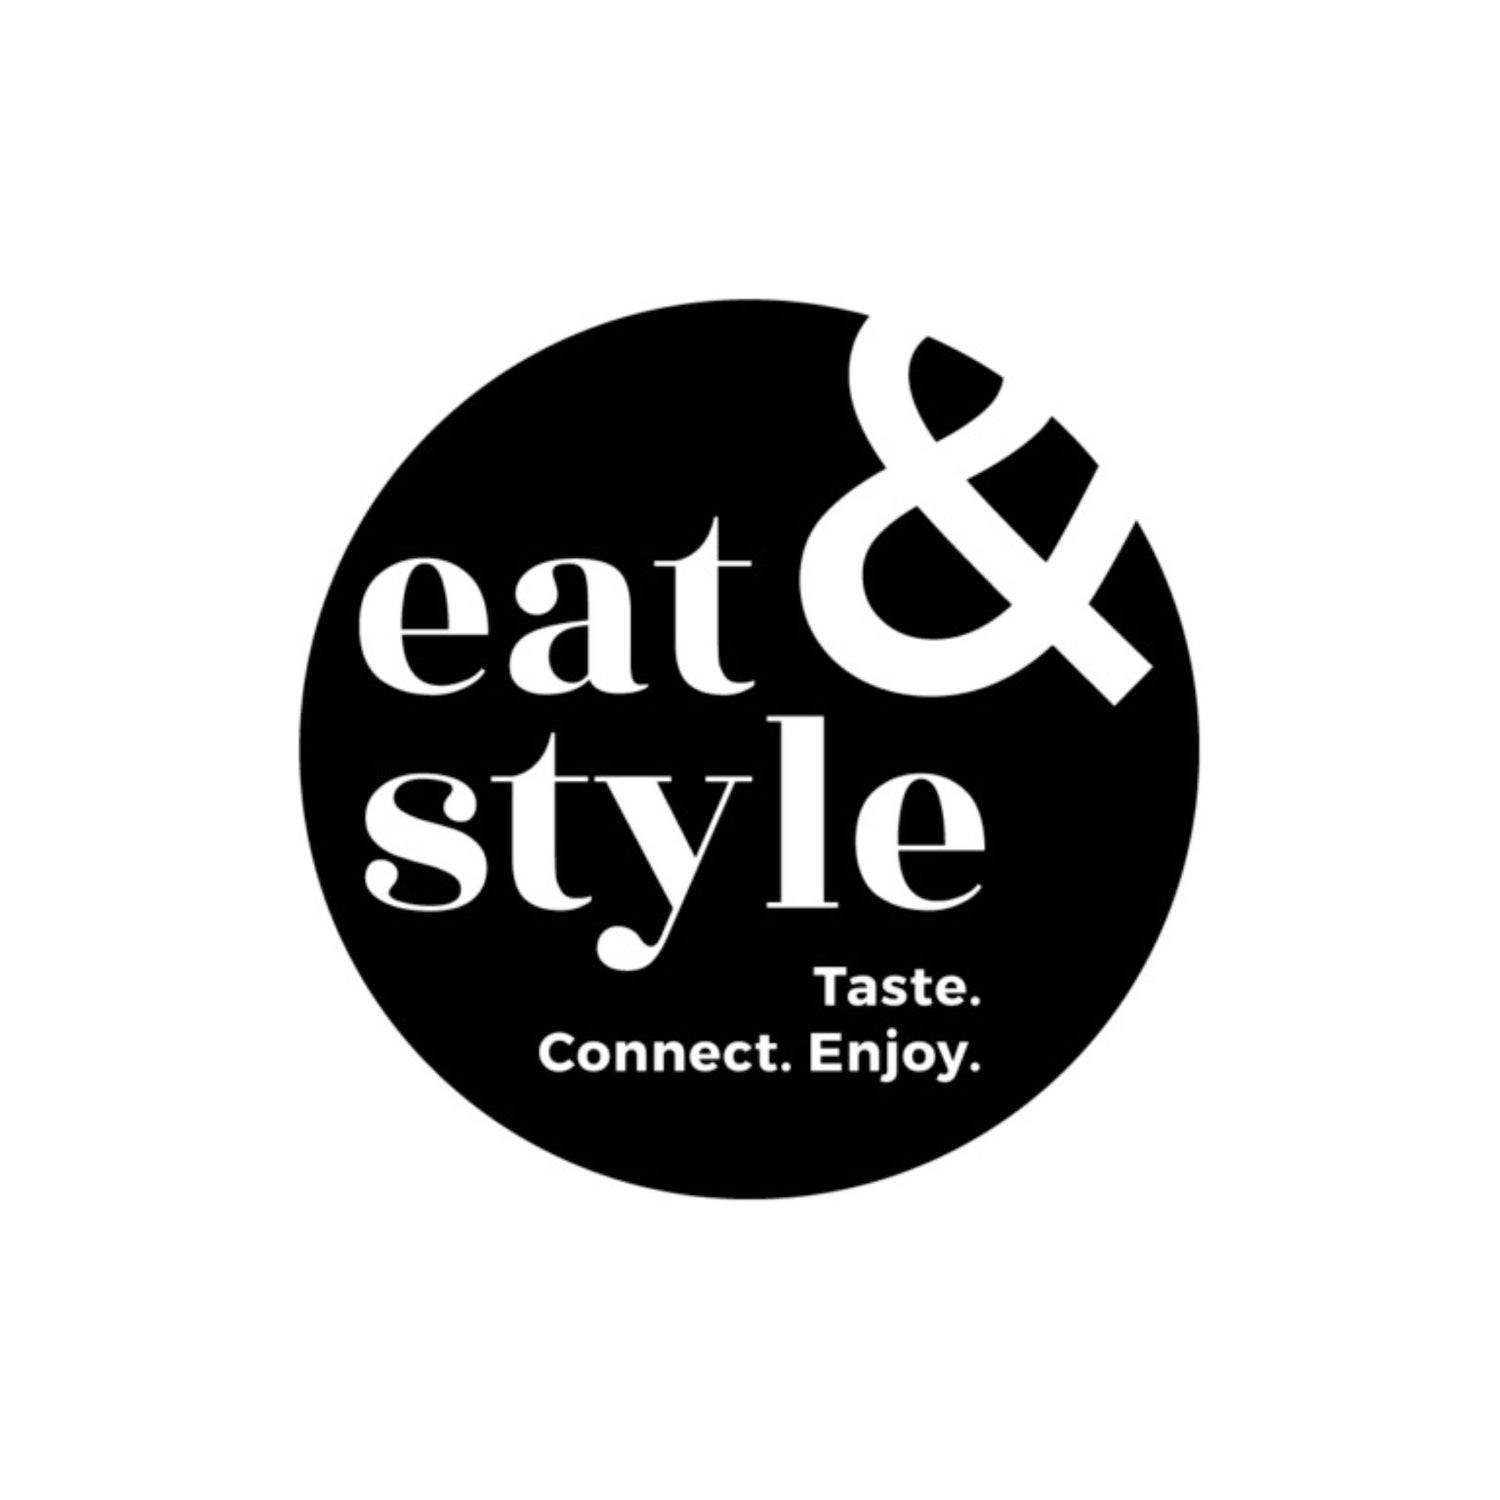 #Eat and Style#